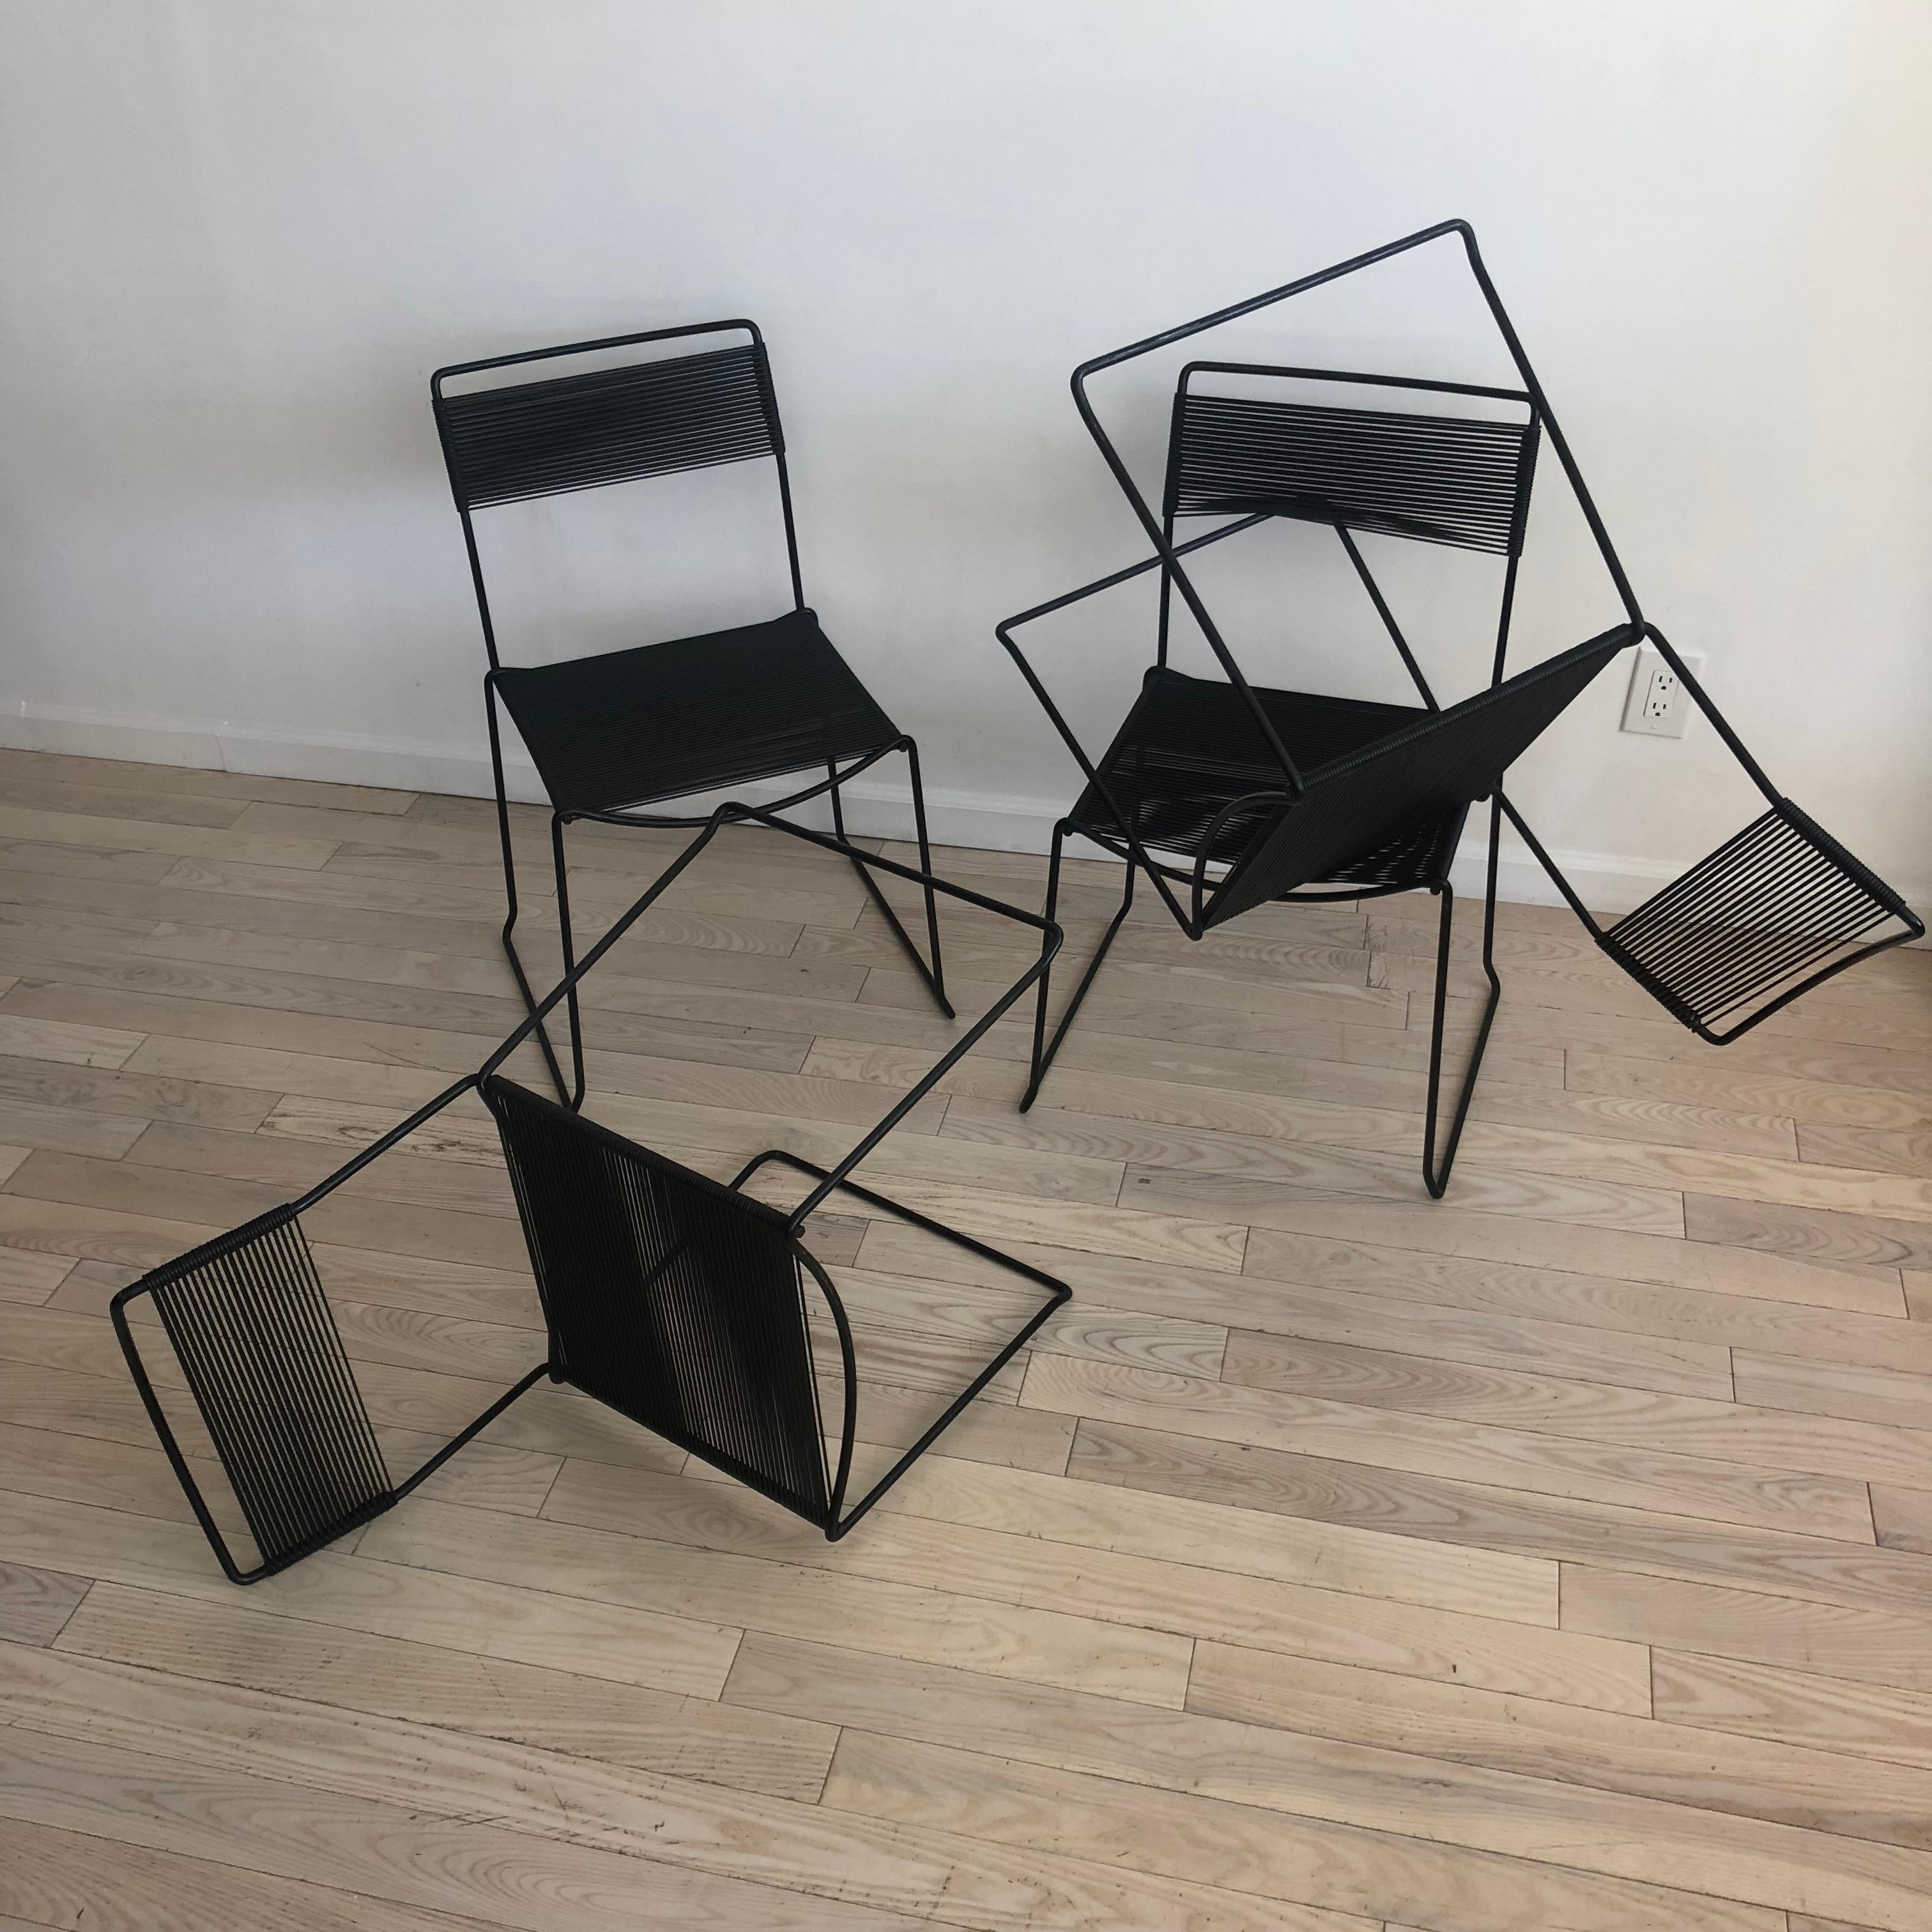 Designed by Giandomenico Belotti, these Spaghetti chairs are very comfortable and amazing looking with PVC spaghetti straps on steel bases. A very successful design by Belotti. Excellent original vintage condition, minor scuffs on legs. Set of four